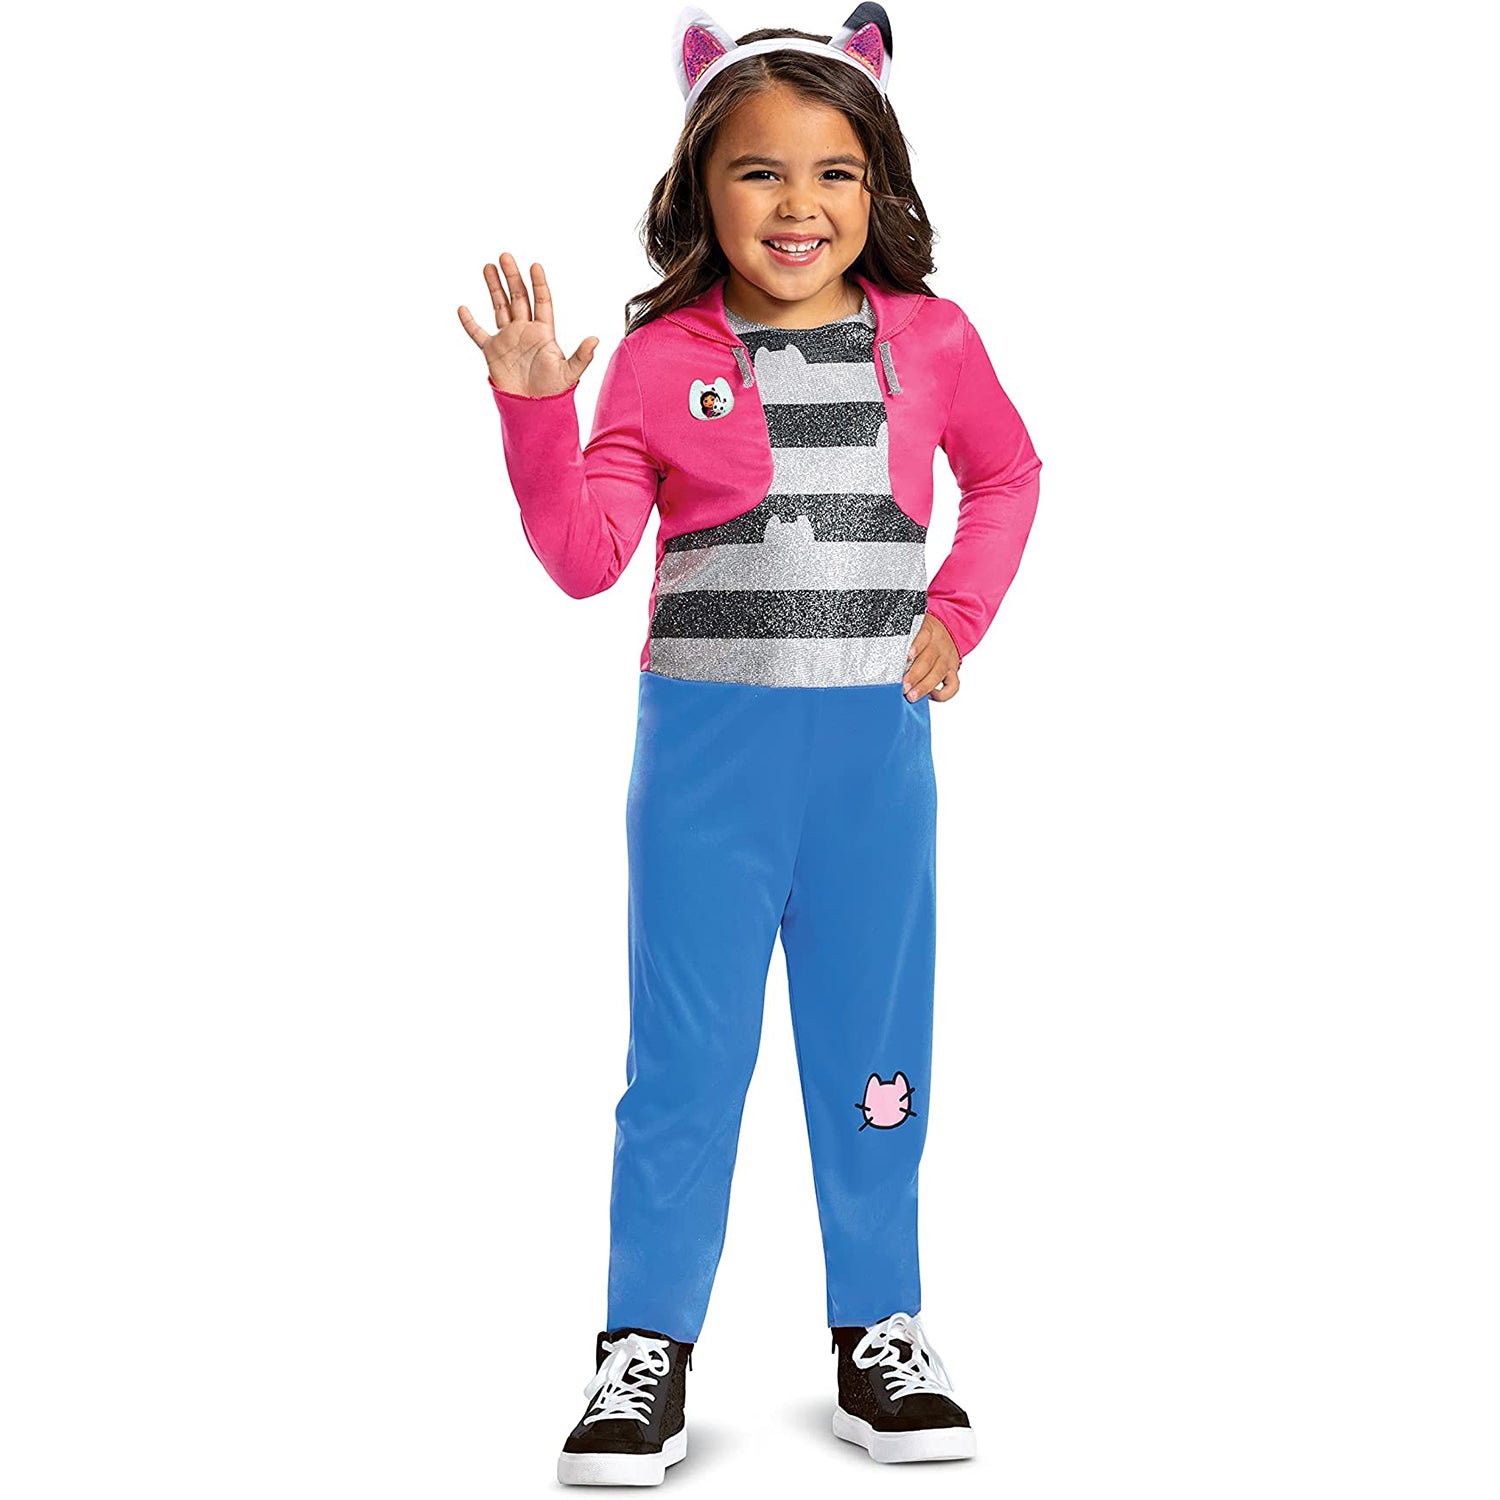 Gabby's Dollhouse Officially Licensed Costume and Cat Ears Headband, Toddler Size Small 4-6X